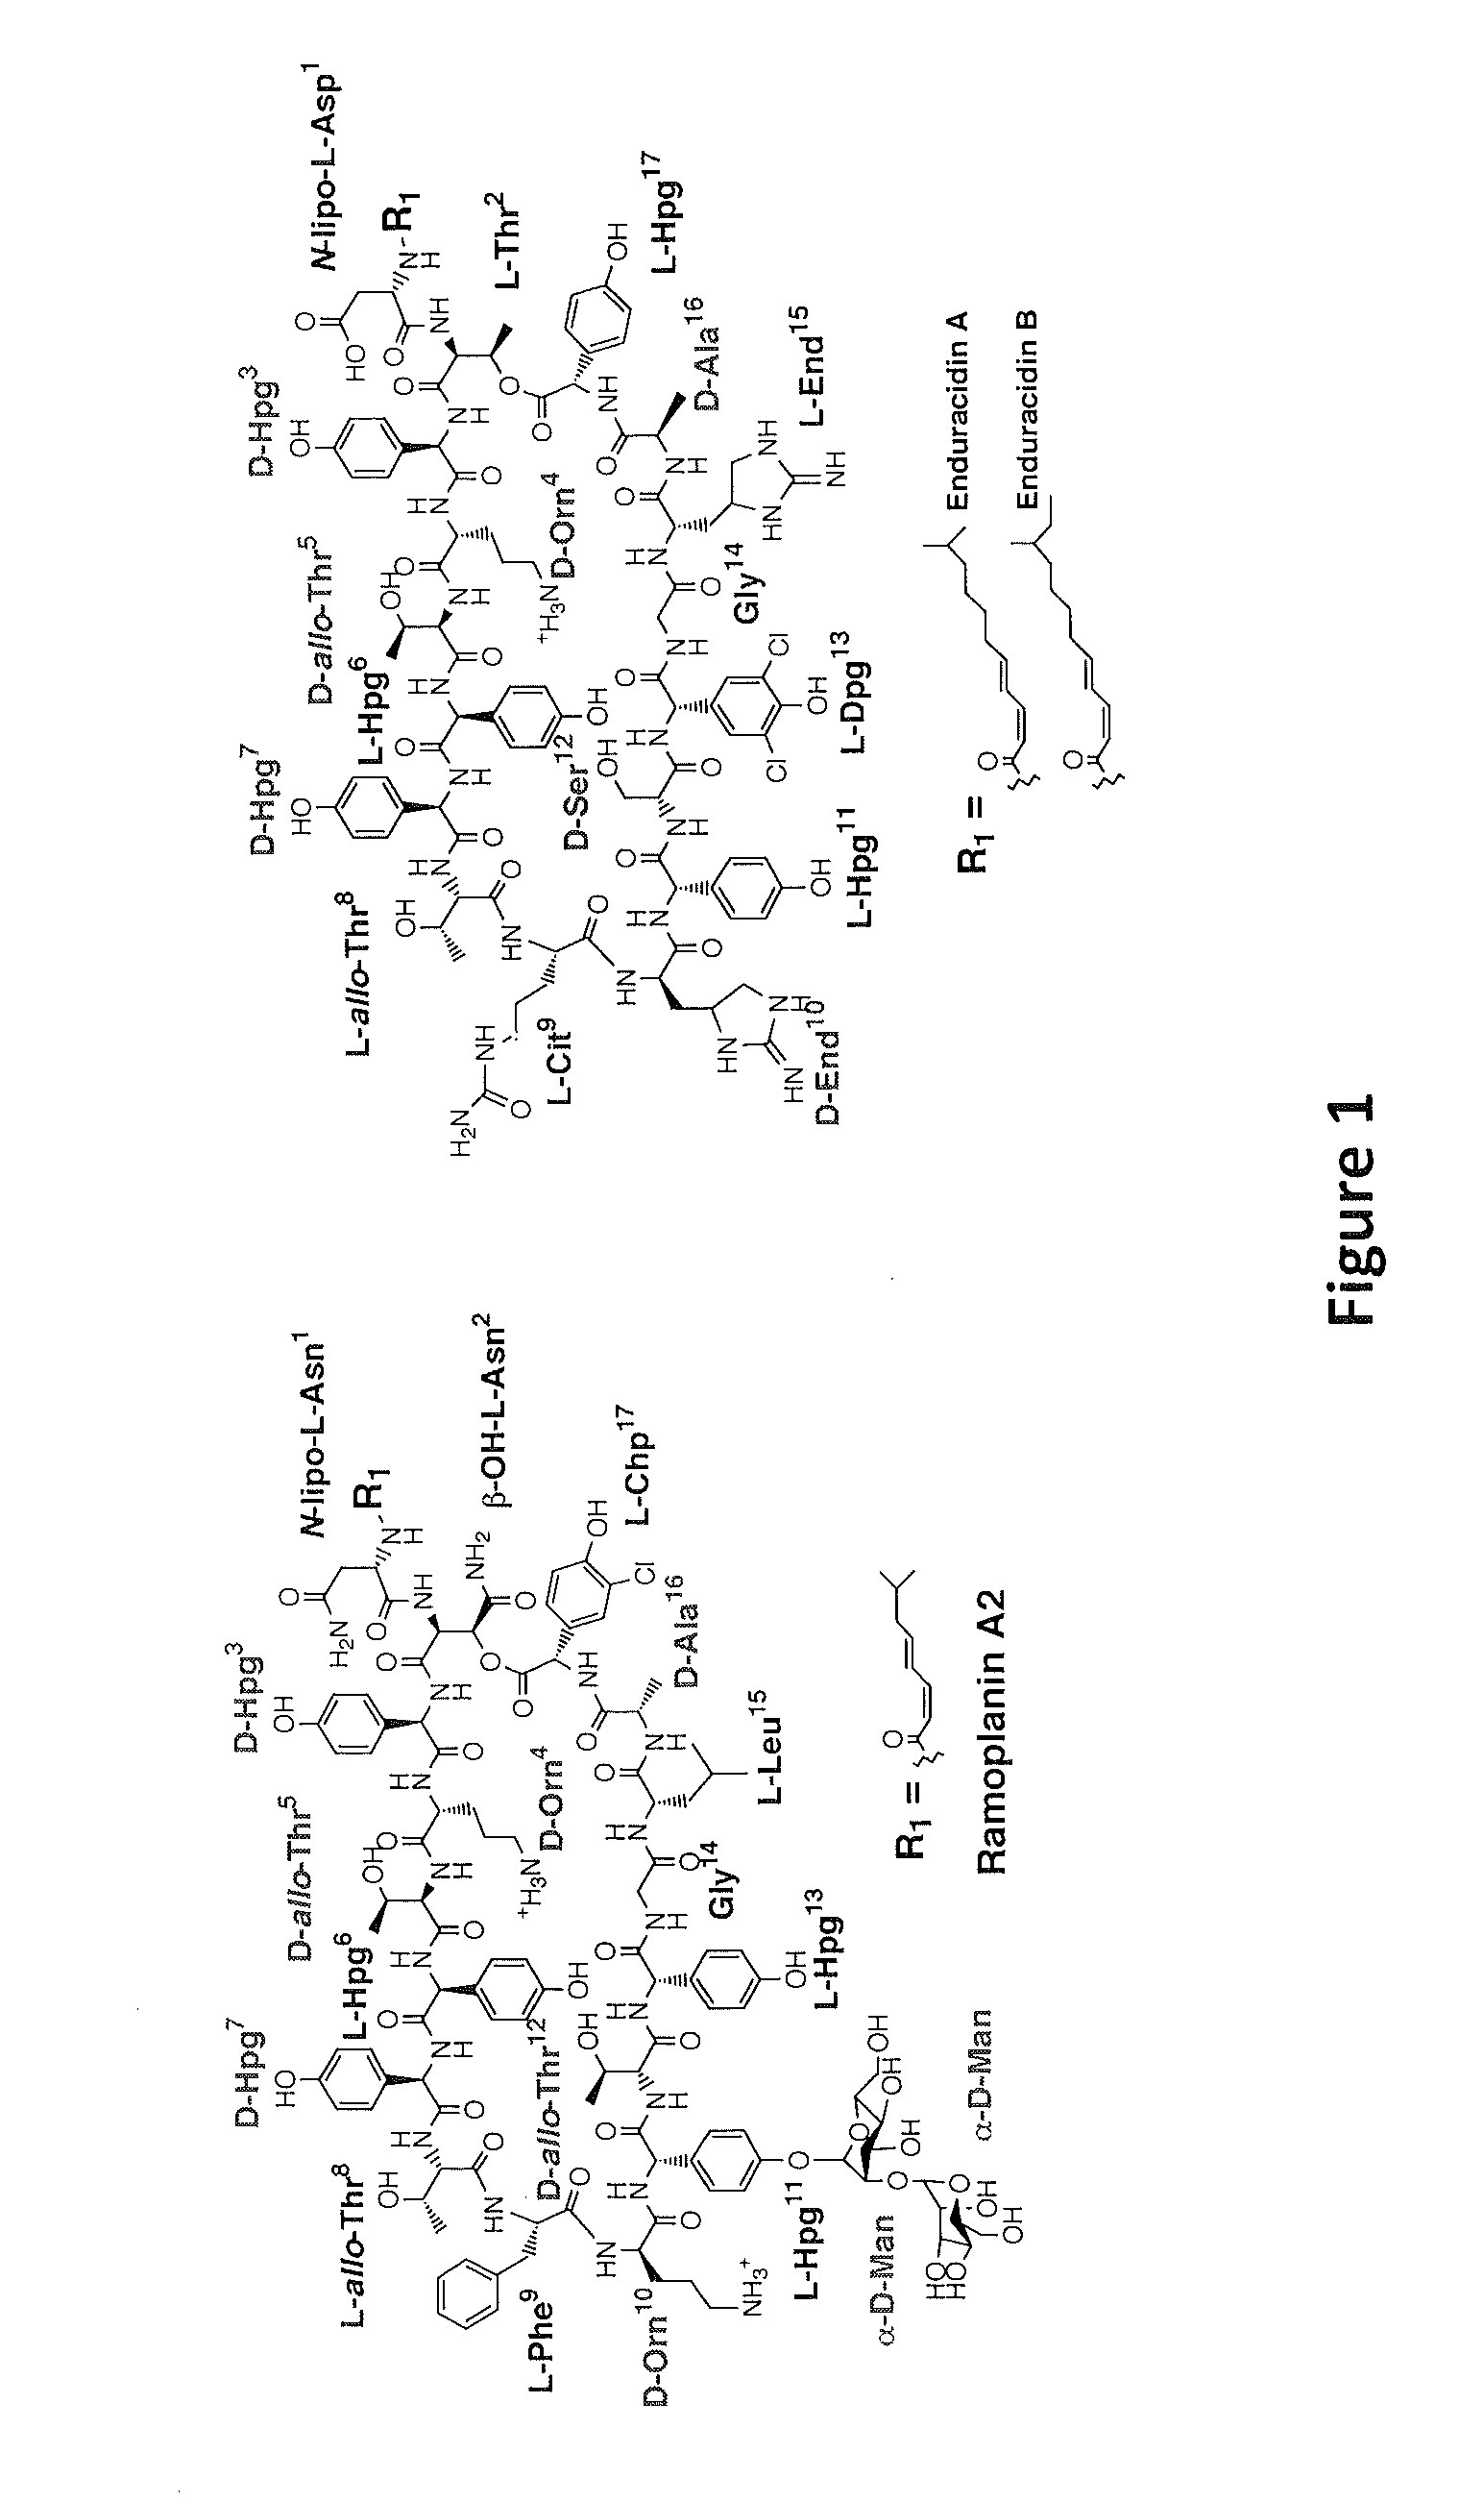 Chaperone-assisted protein expression and methods of use